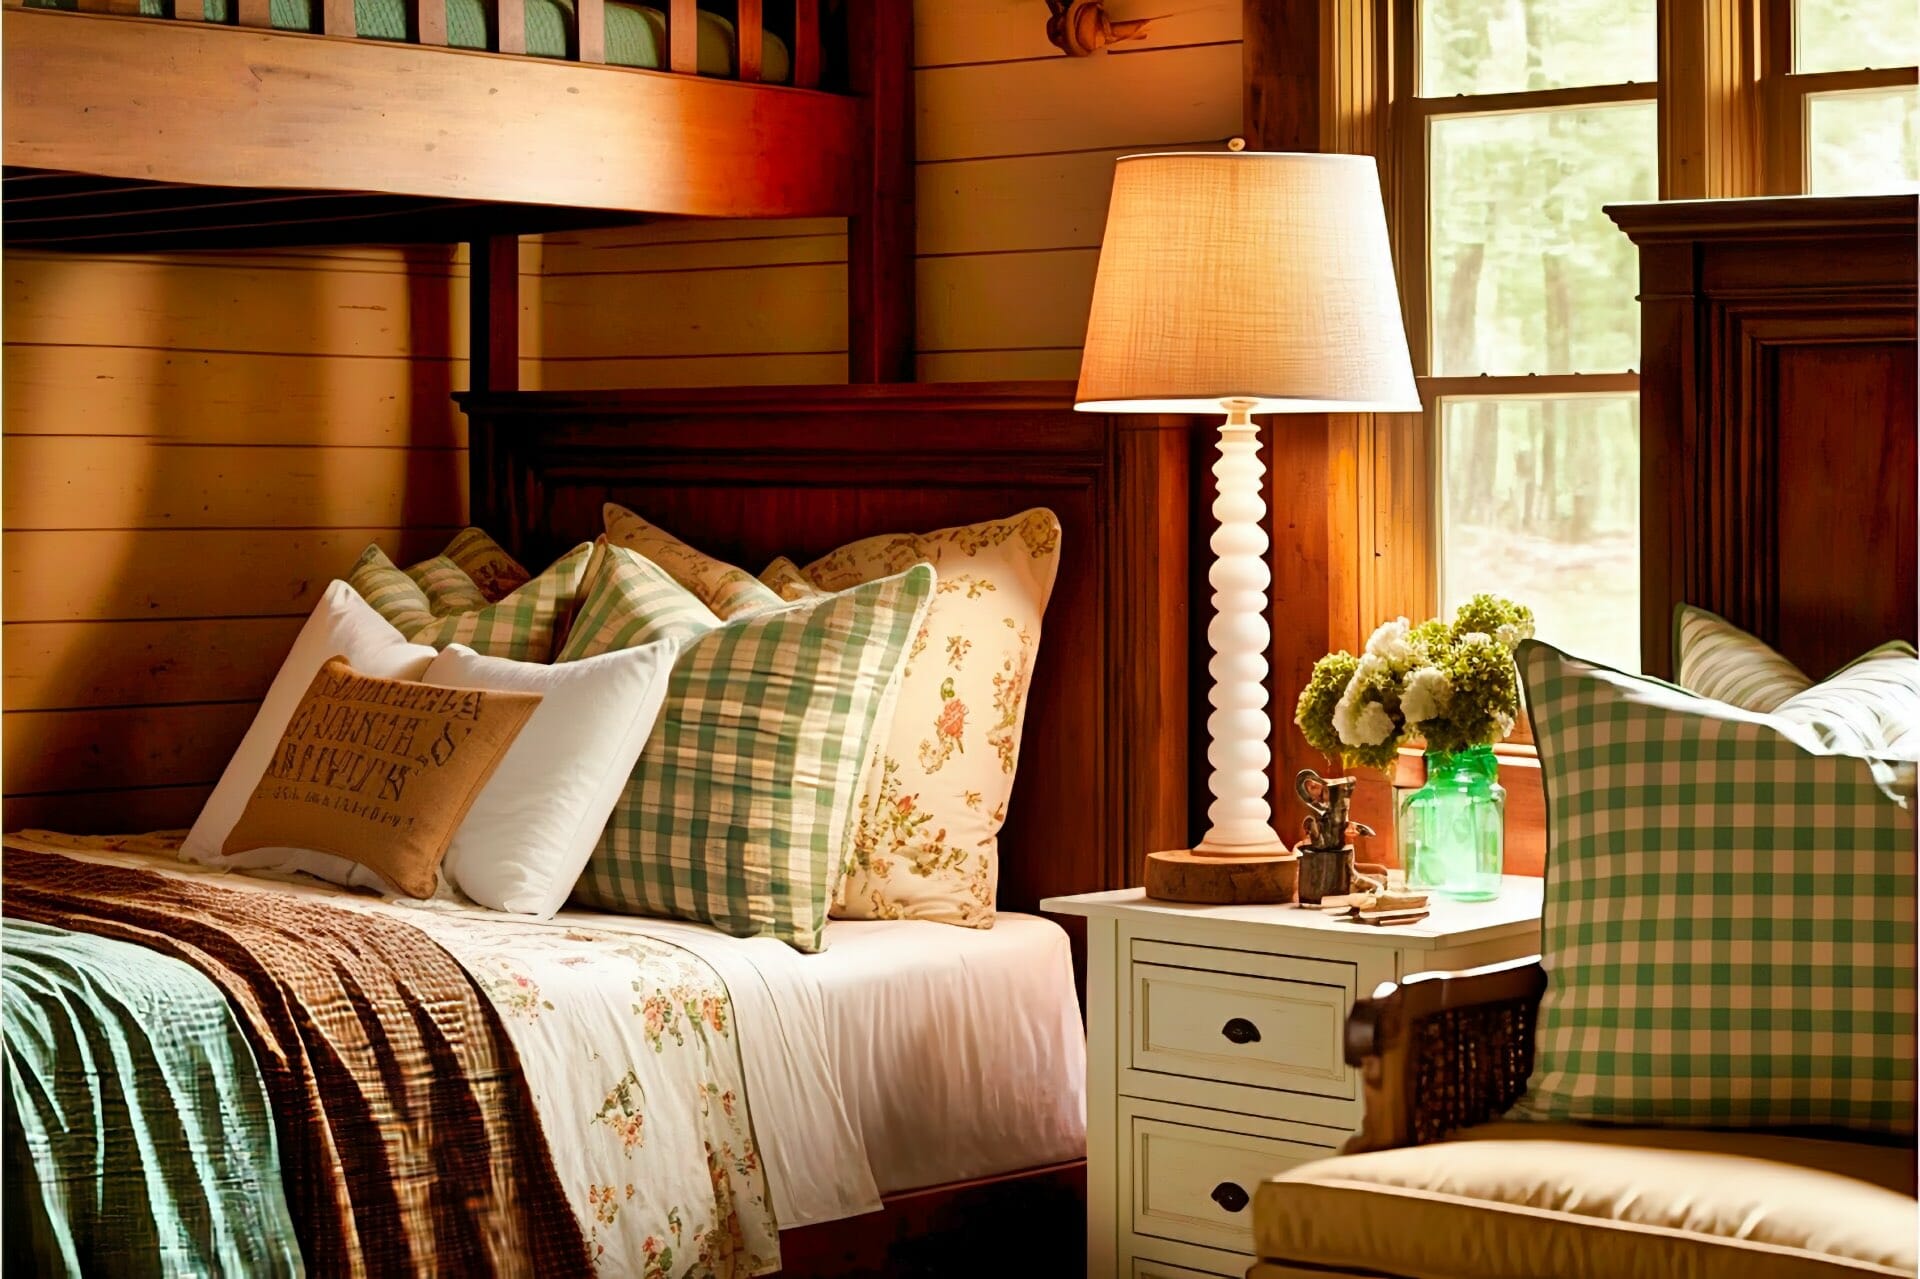 Cottage Style Bedroom With A Cozy And Welcoming Feel, Thanks To The Warm Wood Paneled Walls And Plush Furnishings. A Twin Size Bunk Bed With Simple White Headboards Is Dressed In Cozy Plaid Comforters, And A Collection Of Patterned Throw Pillows Add A Pop Of Color. A Matching Wood Nightstand With A White Lamp Sits Beside The Bed, And A Comfy Armchair In A Neutral Fabric Provides A Relaxing Seating Option. A Braided Rug In Shades Of Red And White Anchors The Space, And A Collection Of Framed Vintage Posters Adds A Touch Of Whimsy.